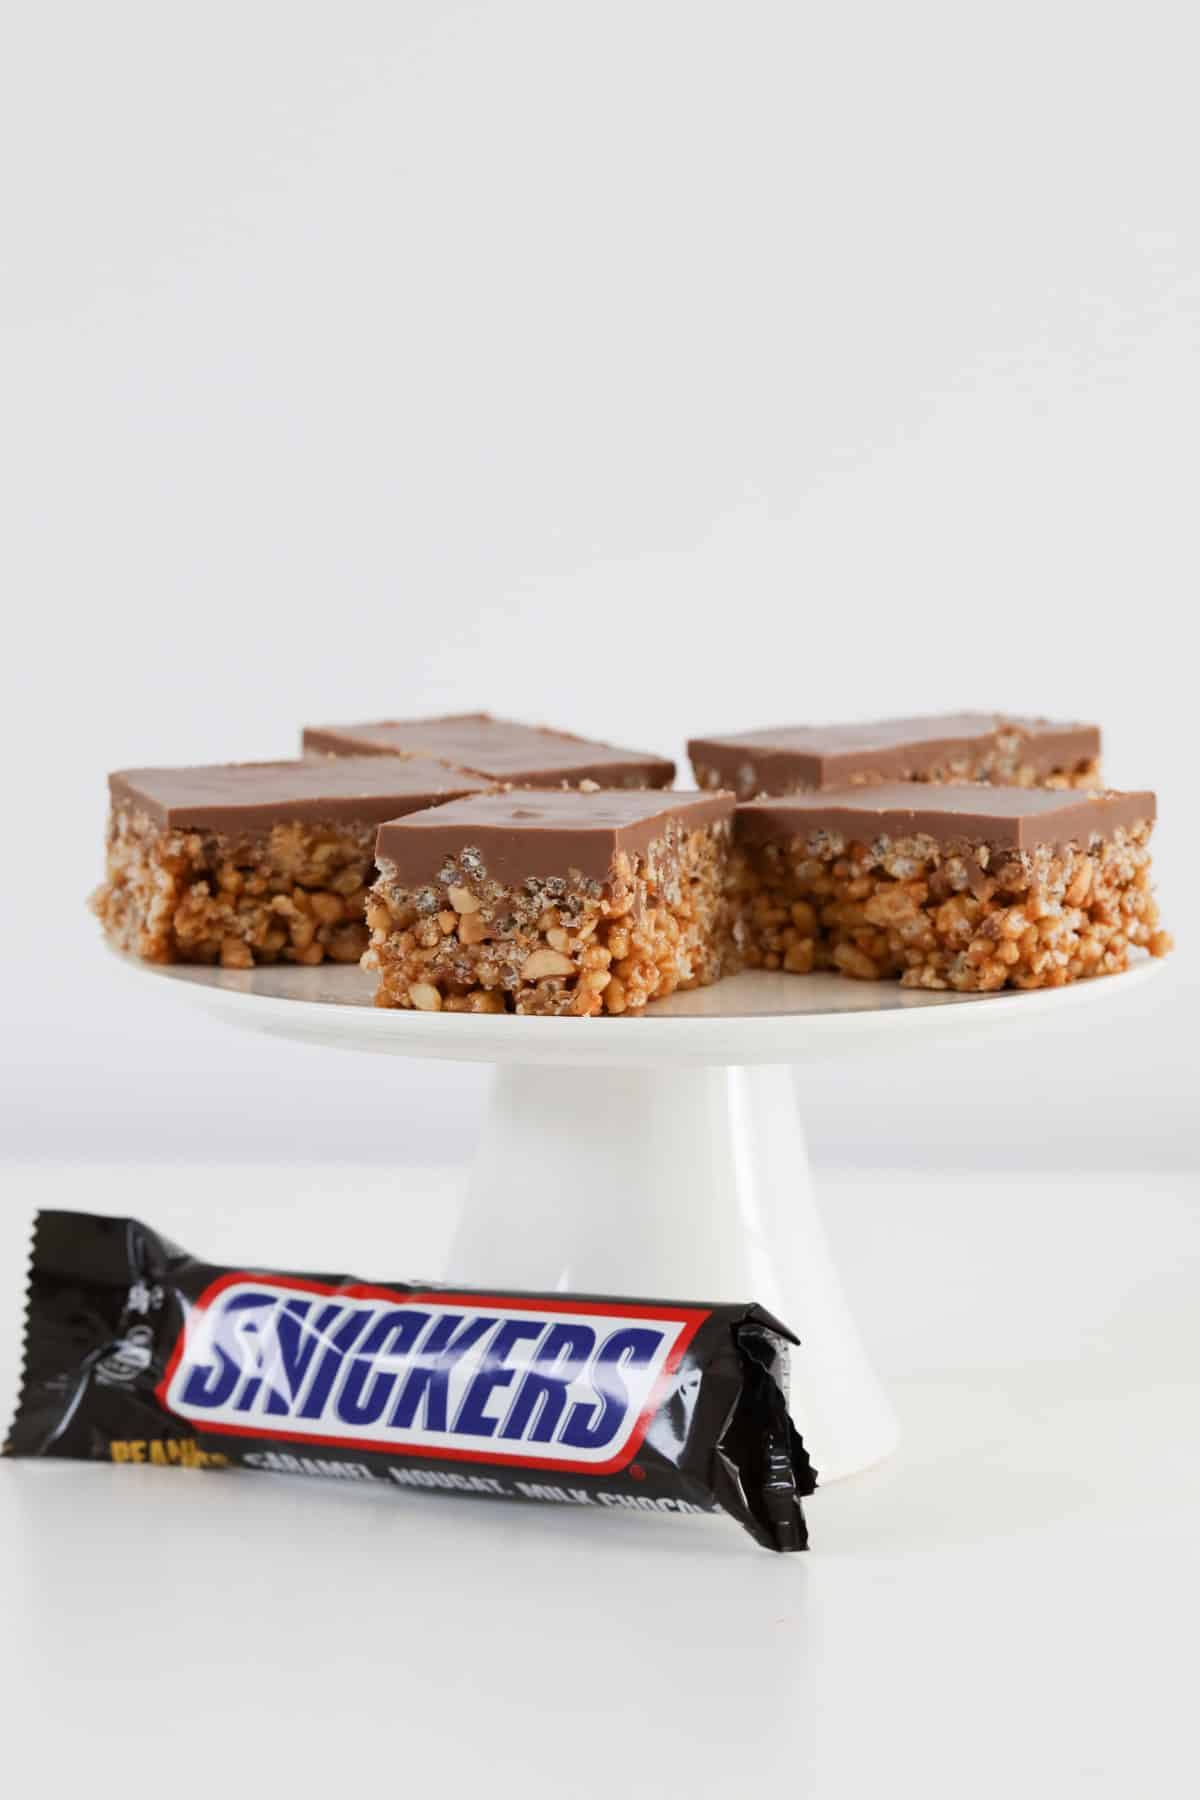 pieces of snickers slice arranged on a white stand.